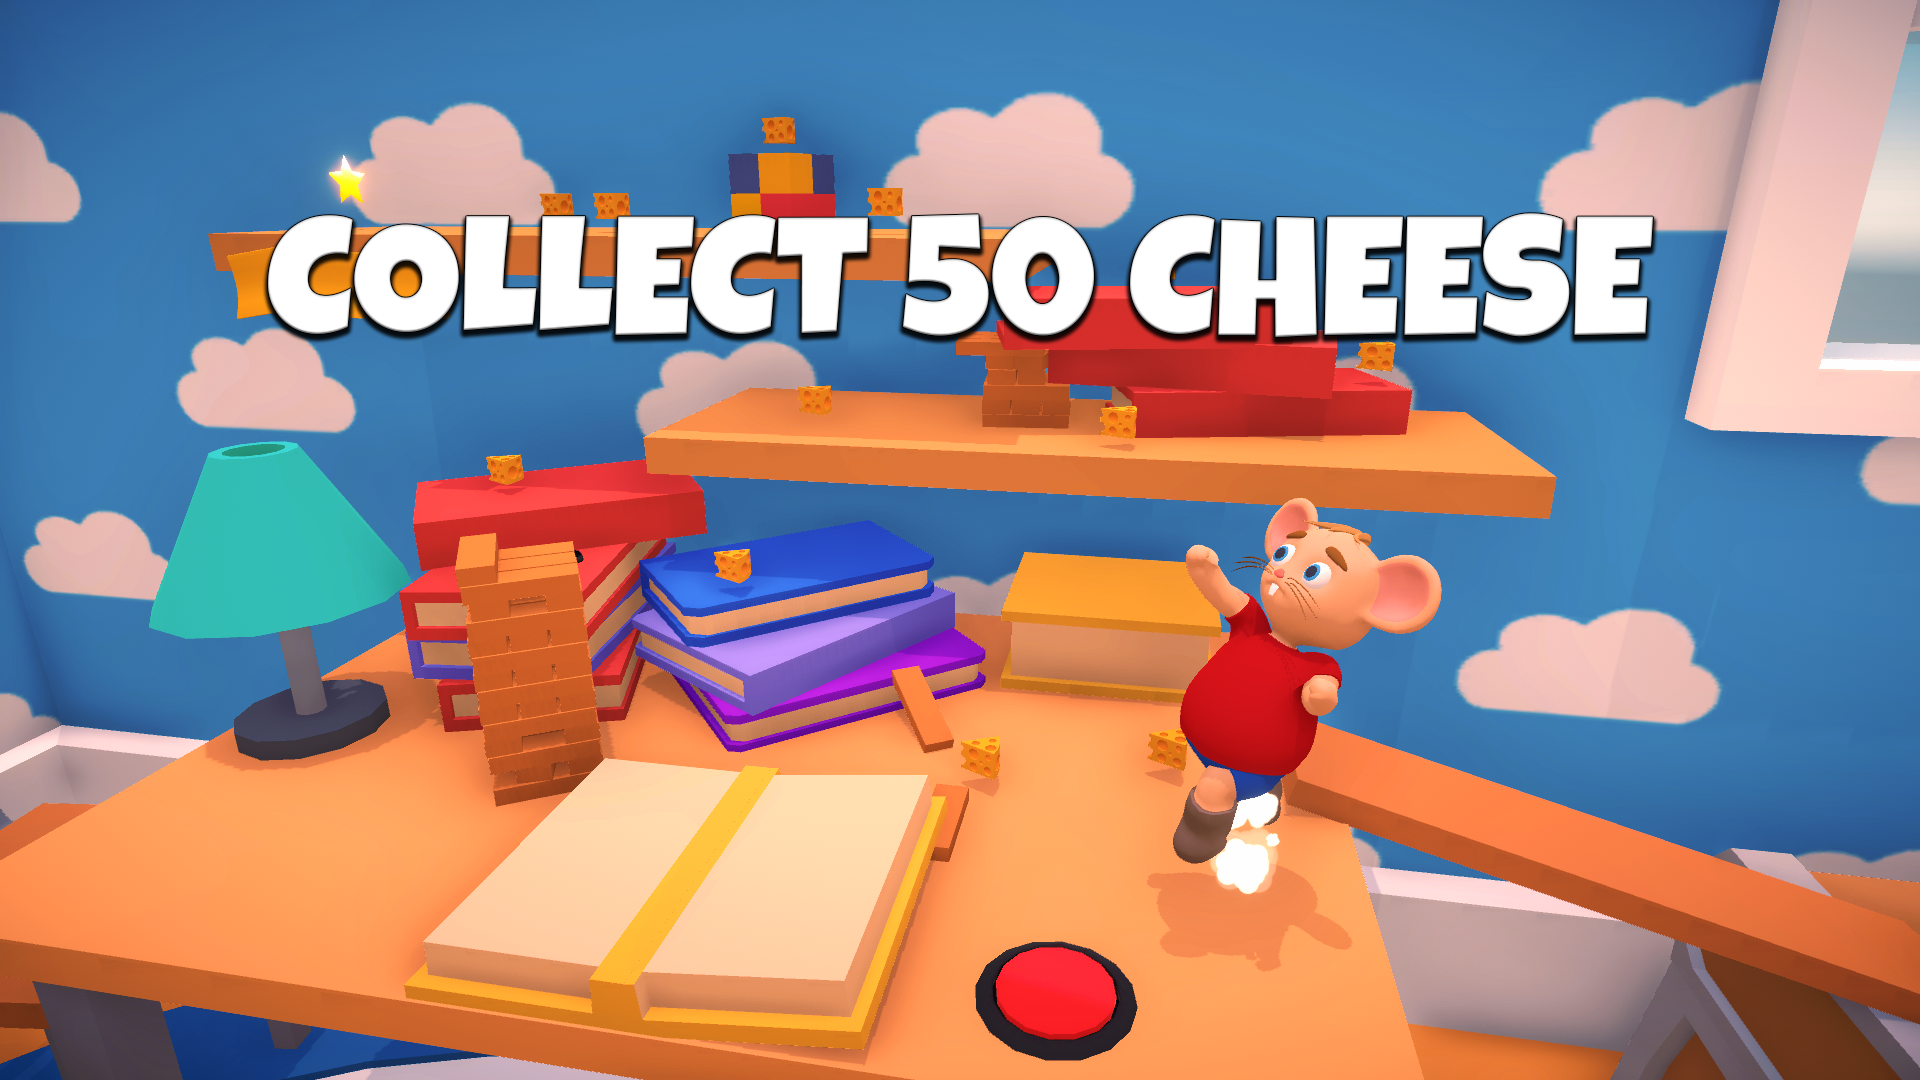 Icon for Collect 50 Cheese